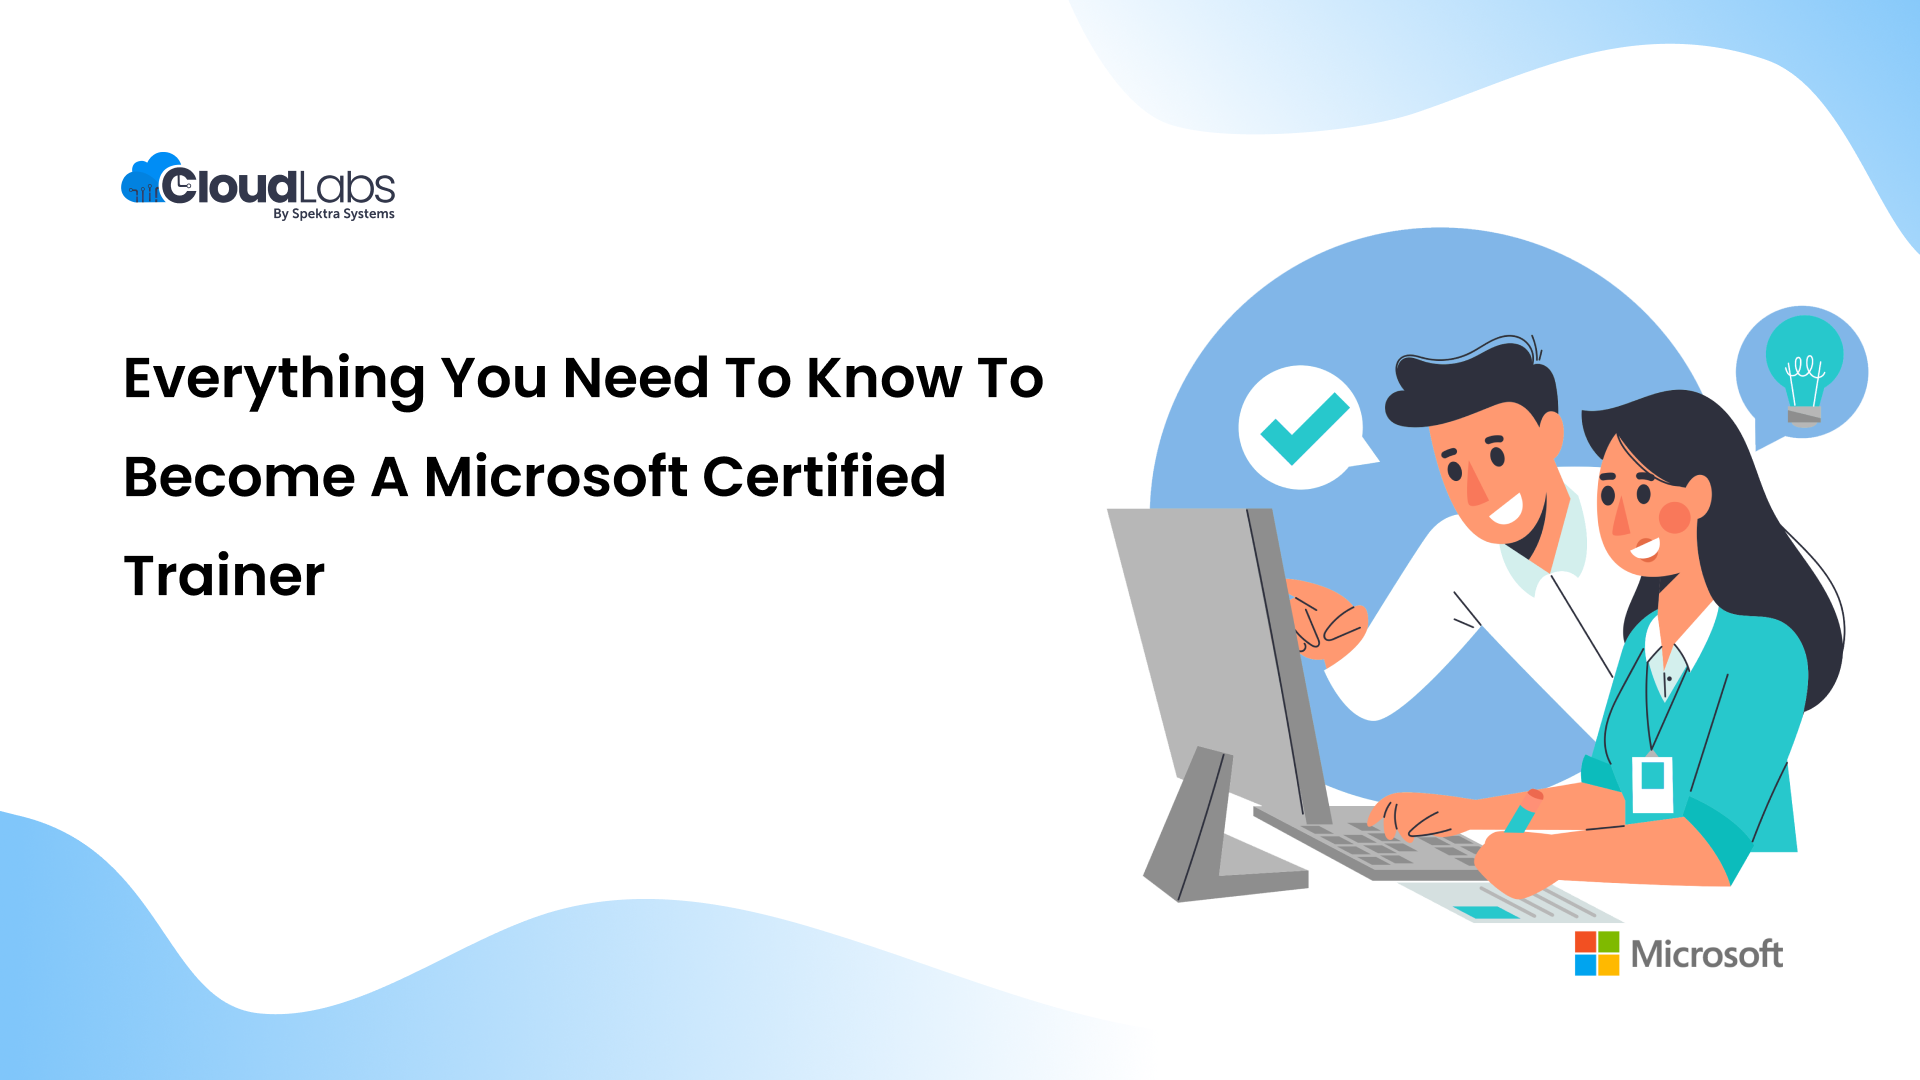 Everything You Need To Know To Become A Microsoft Certified Trainer